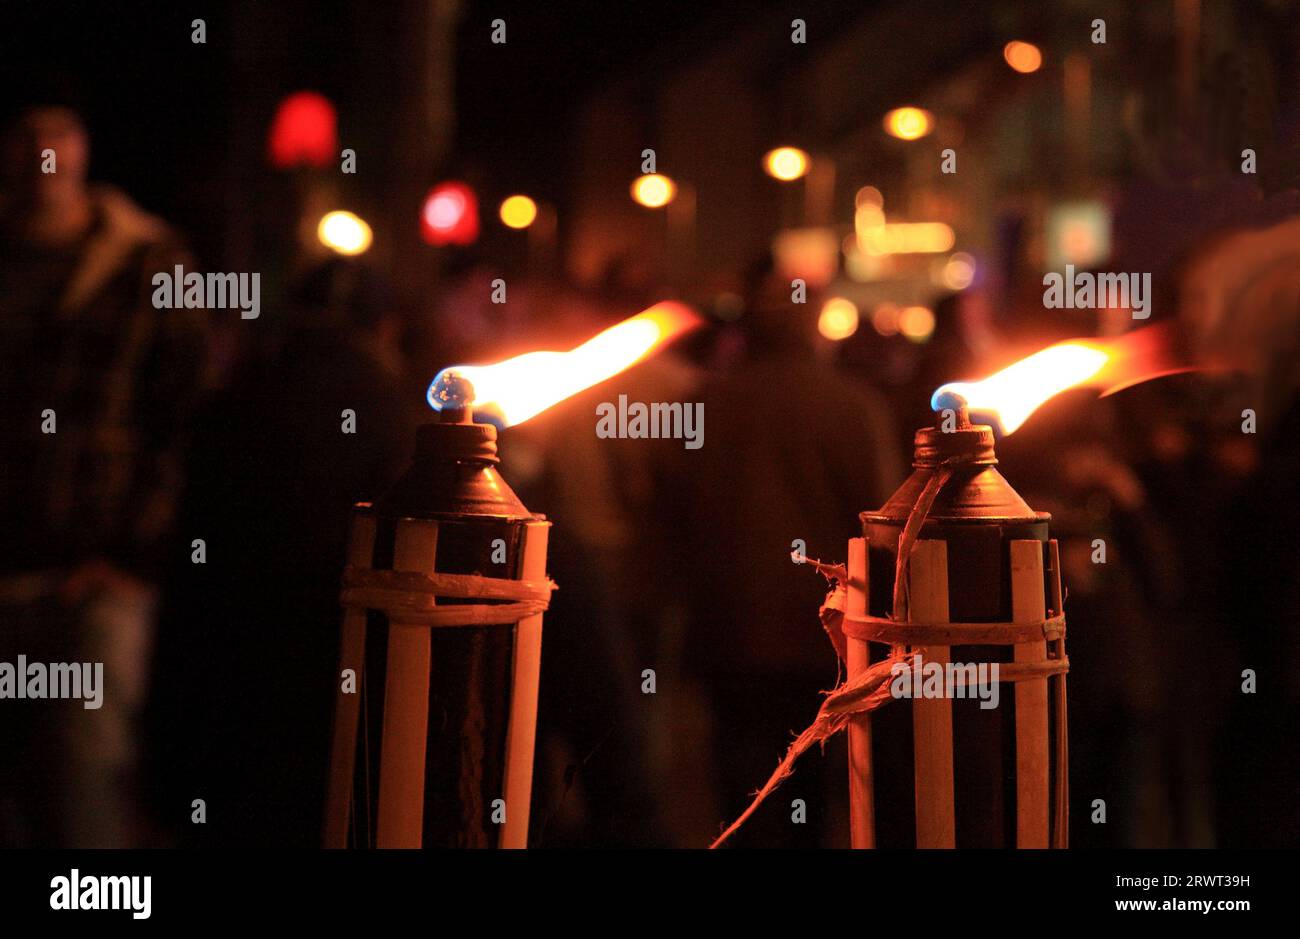 Two burning torches, background person in blur and colourful lights Stock Photo